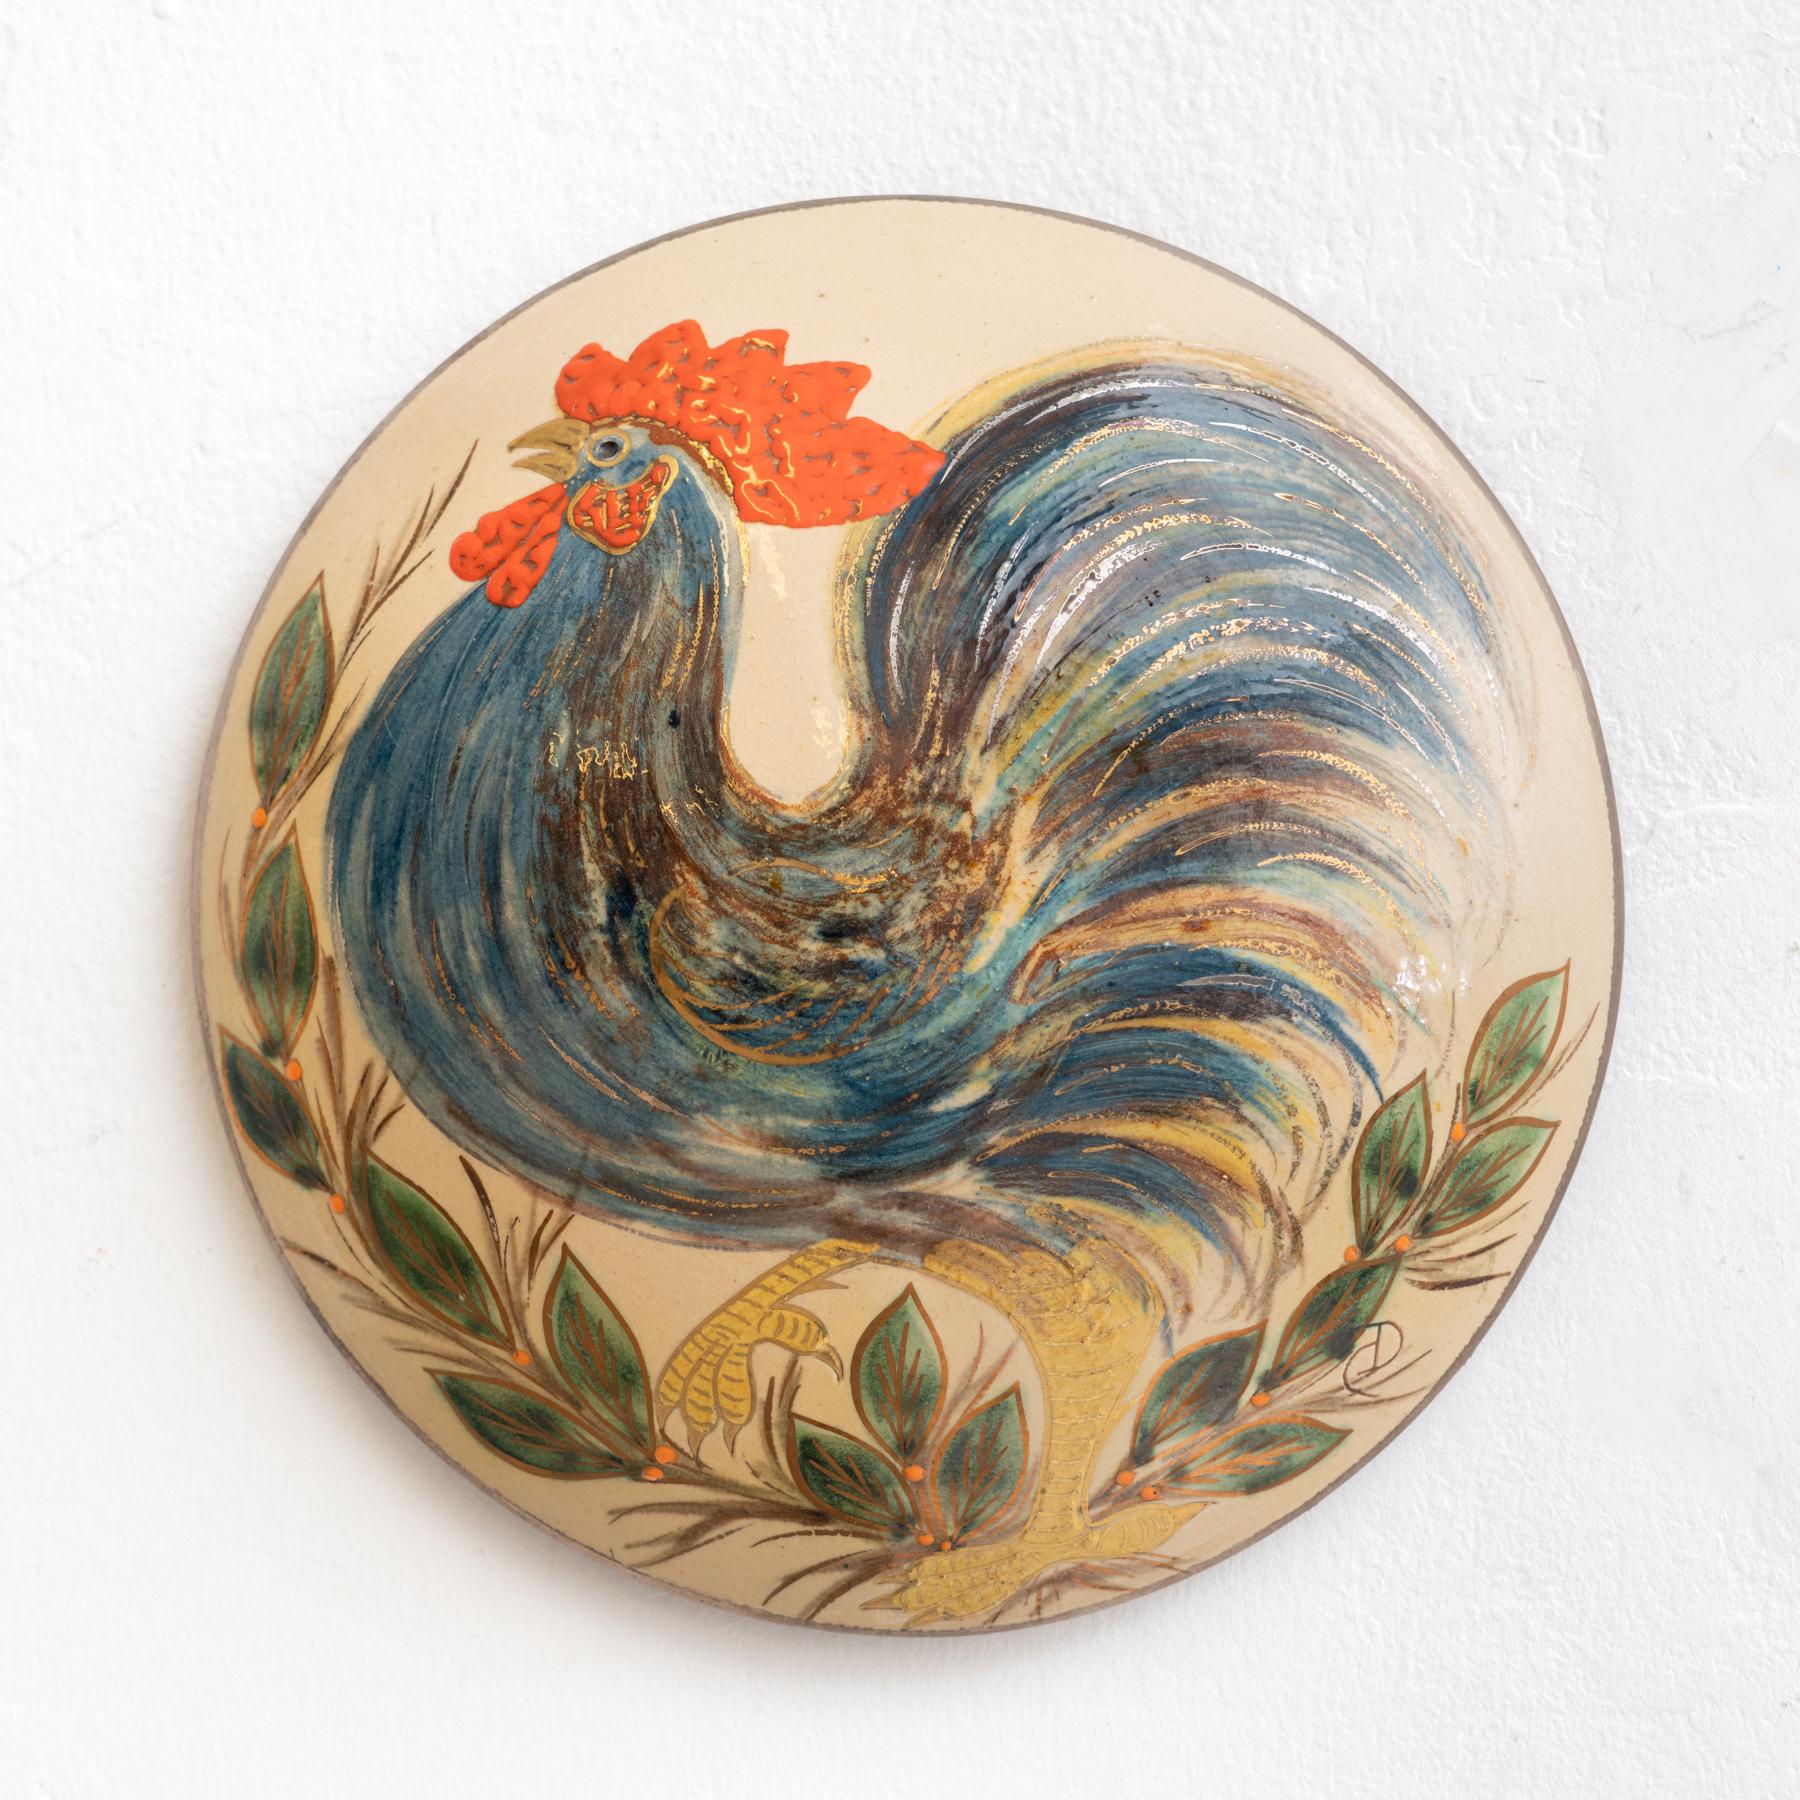 Ceramic hand painted plate artwork by Catalan artist Diaz Costa, circa 1960.

In original condition, with minor wear consistent of age and use, preserving a beautiful patina.